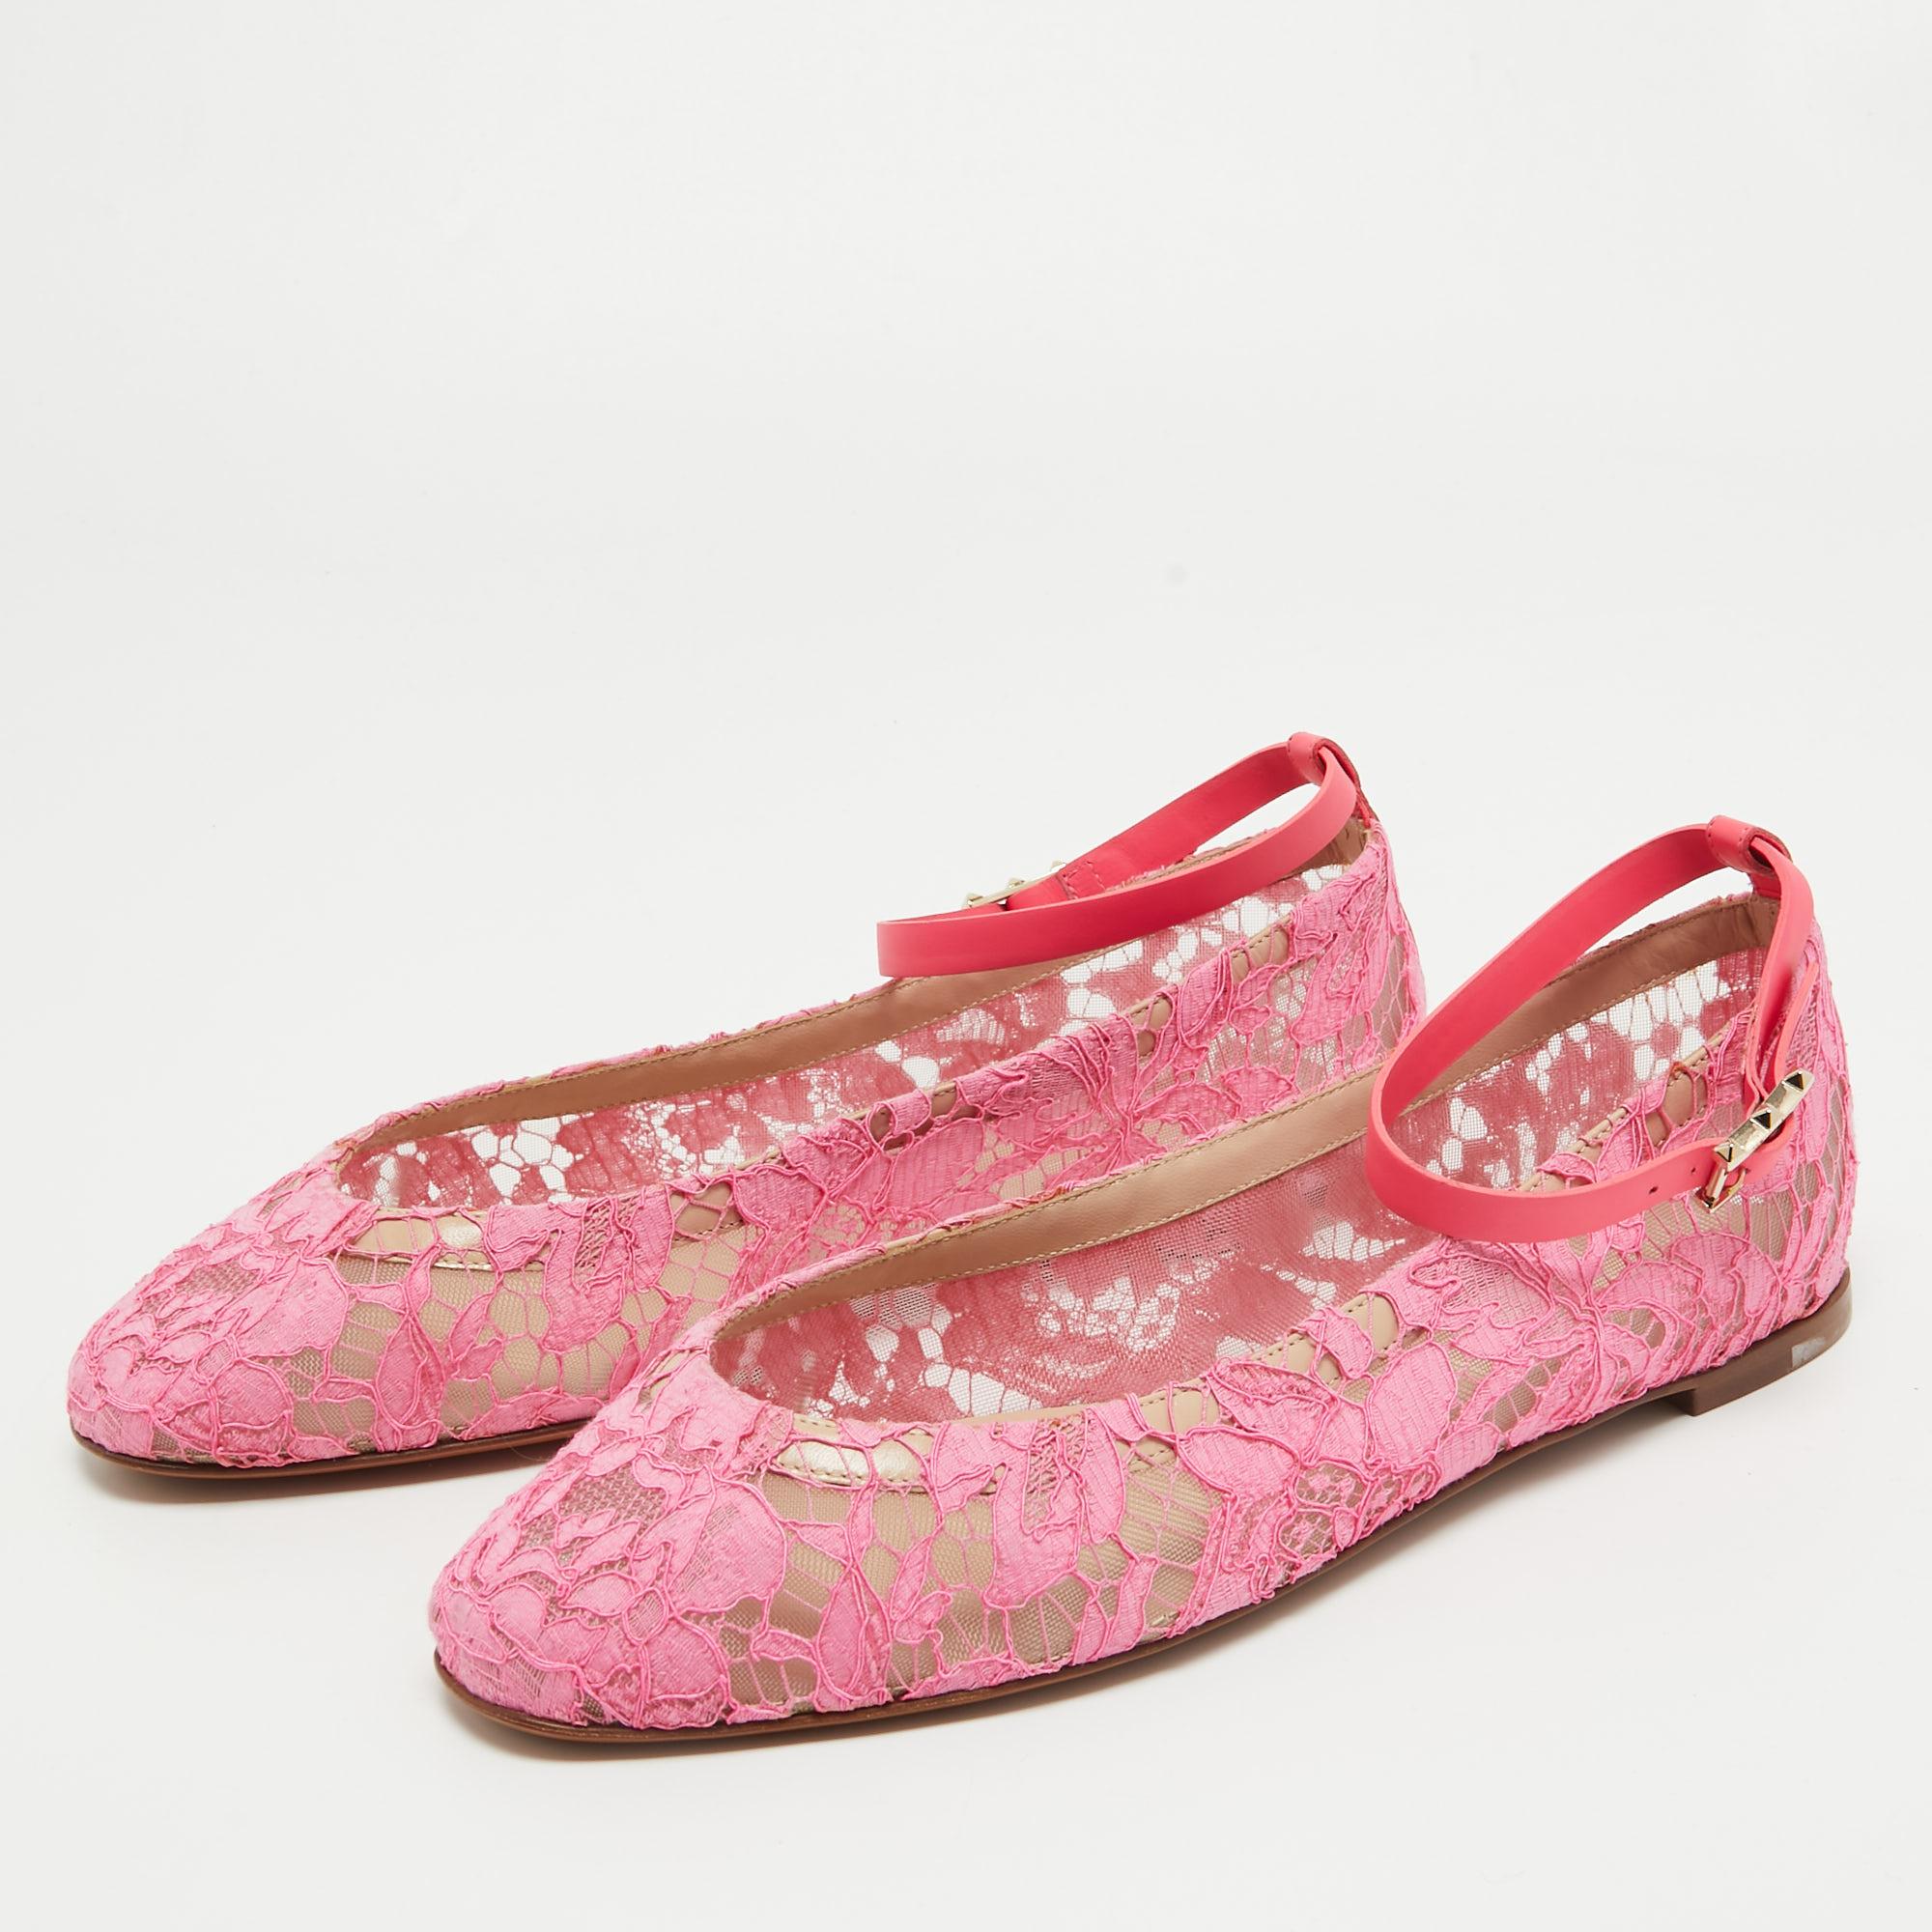 You'll feel like a princess by slipping into these ballet flats by Valentino. These pink flats are crafted in lace with leather edges and feature an intricate pattern all over. The pair comes with ankle straps and leather lined insoles. Pair these